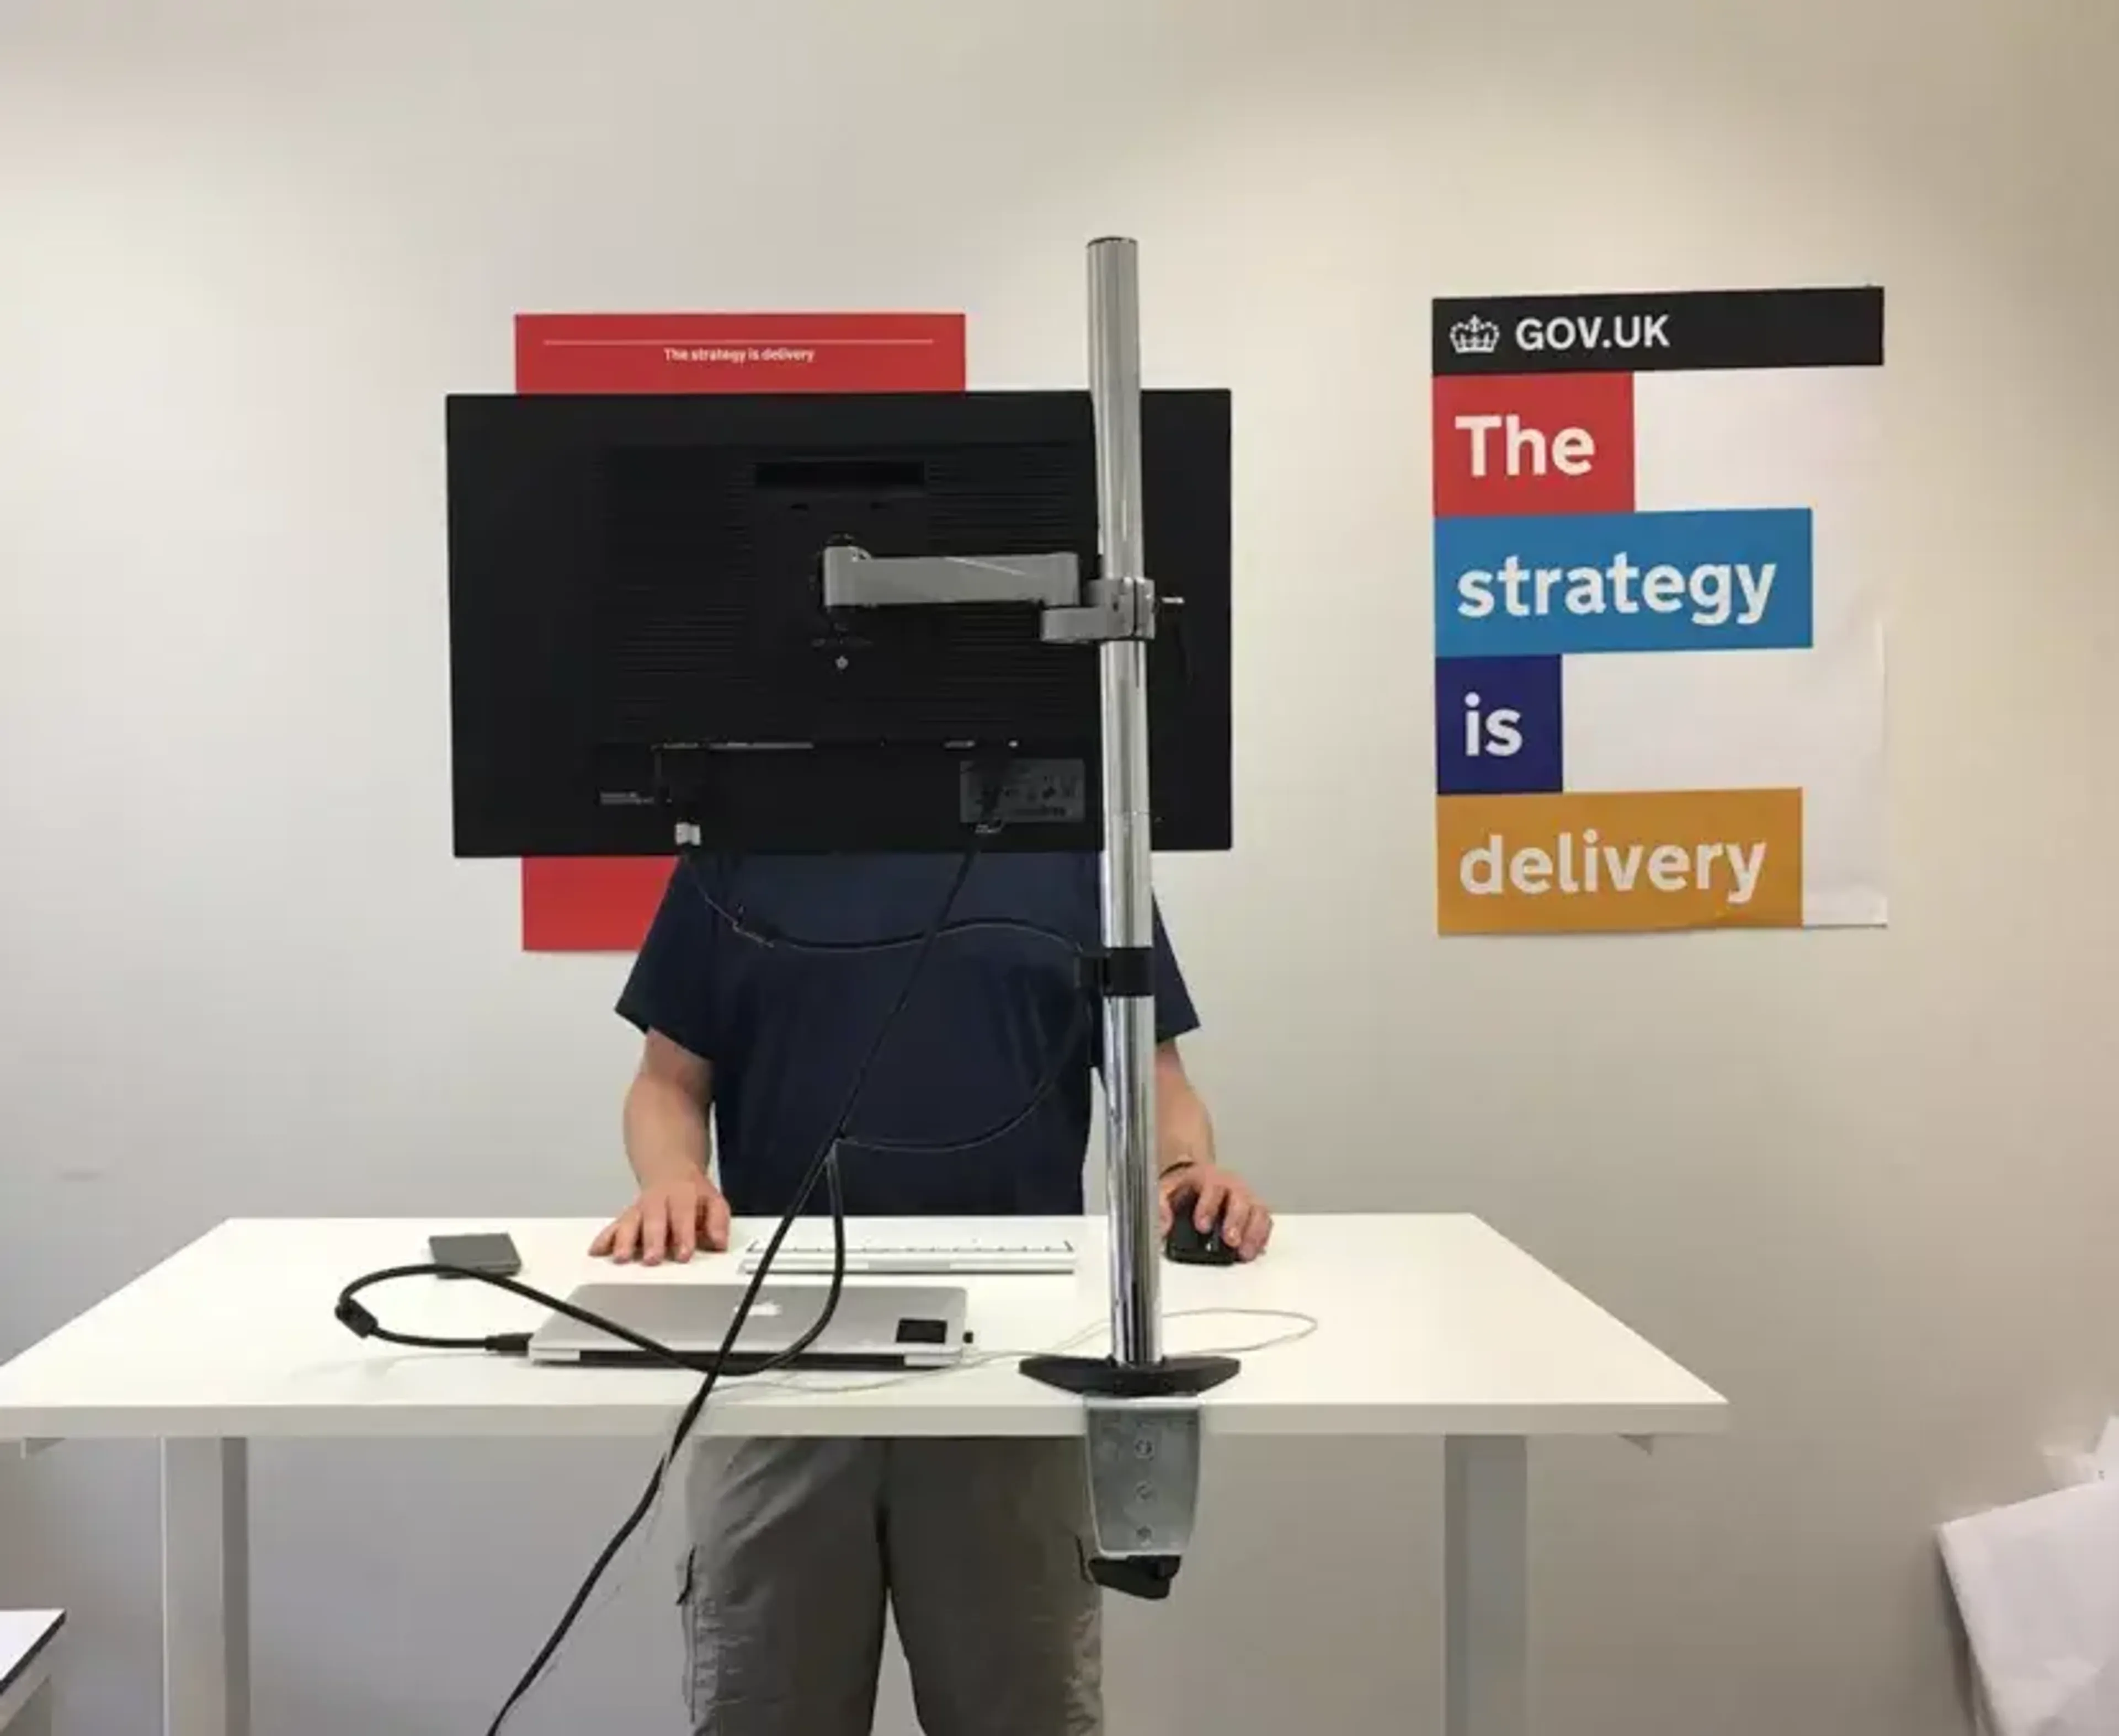 The strategy is delivery